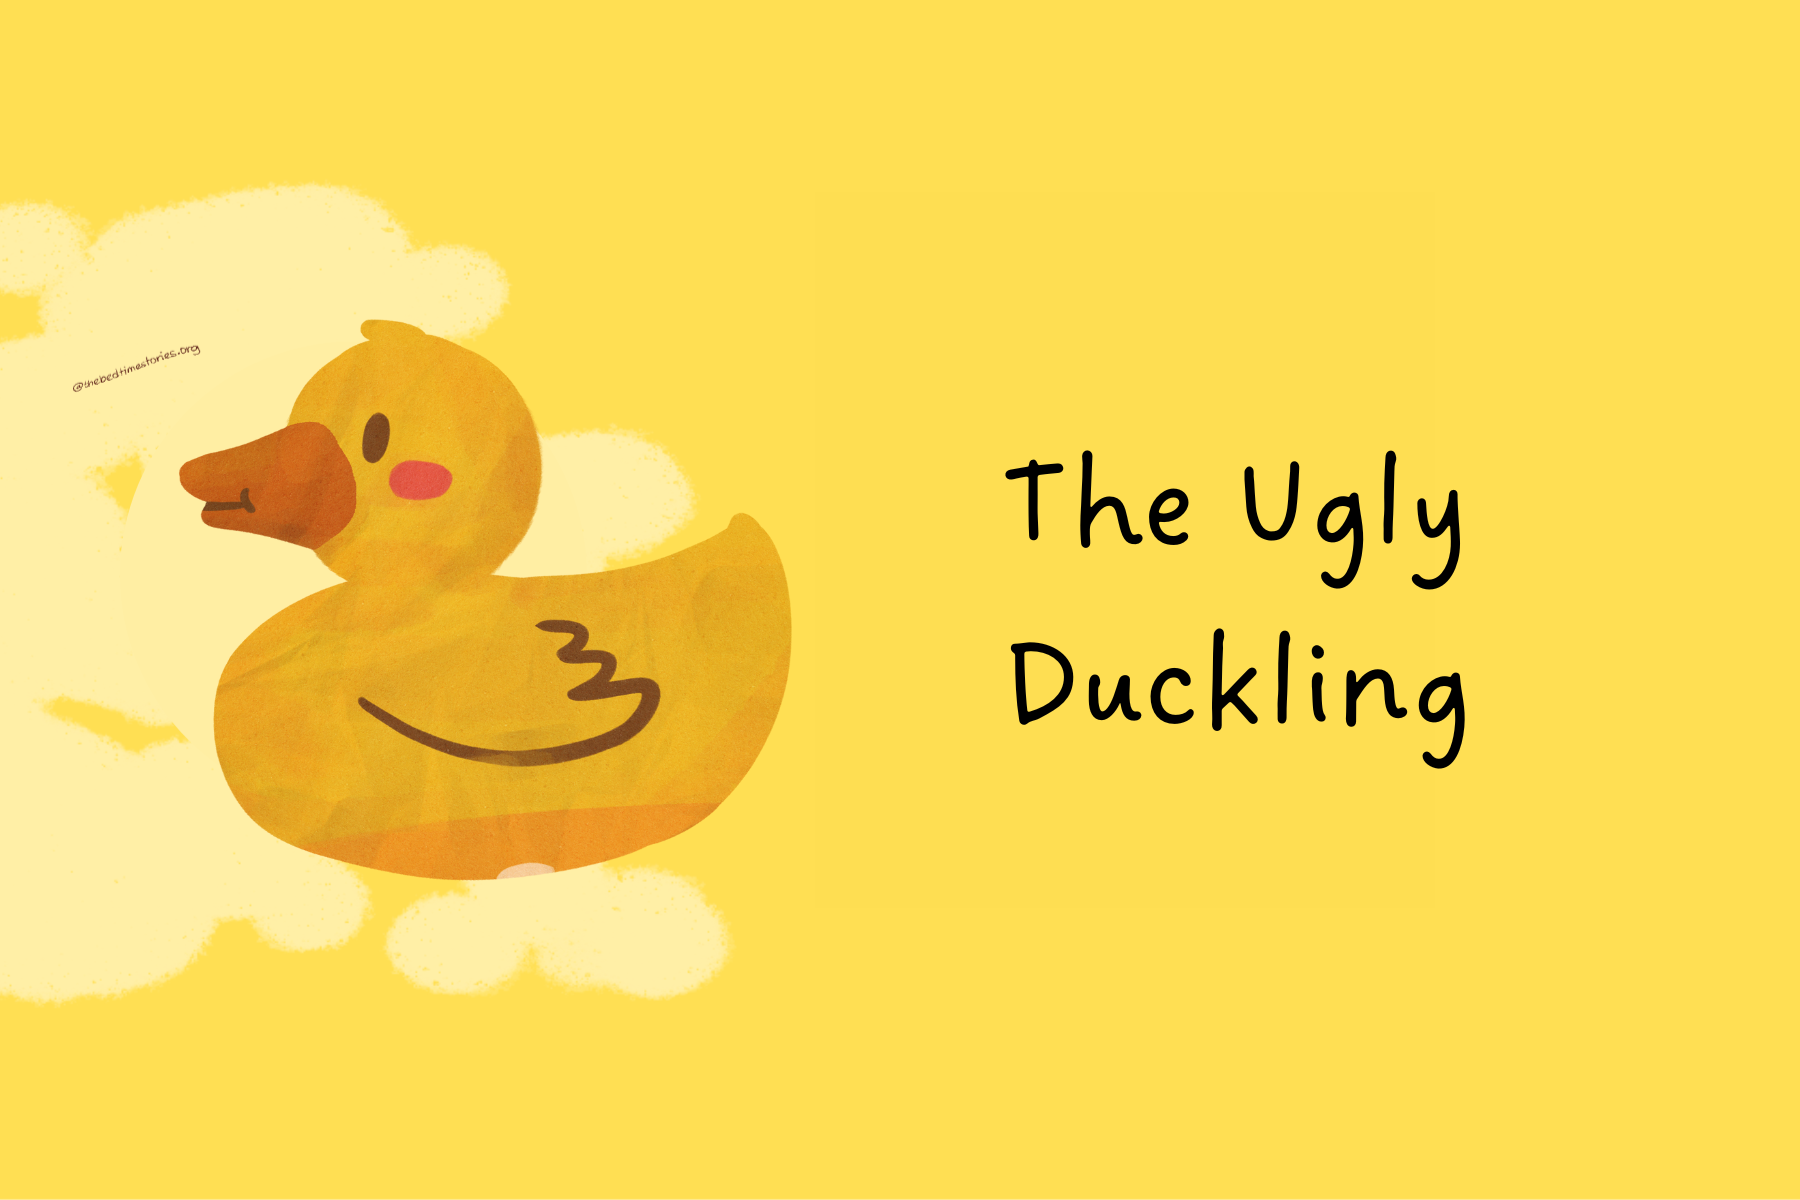 the ugly duckling